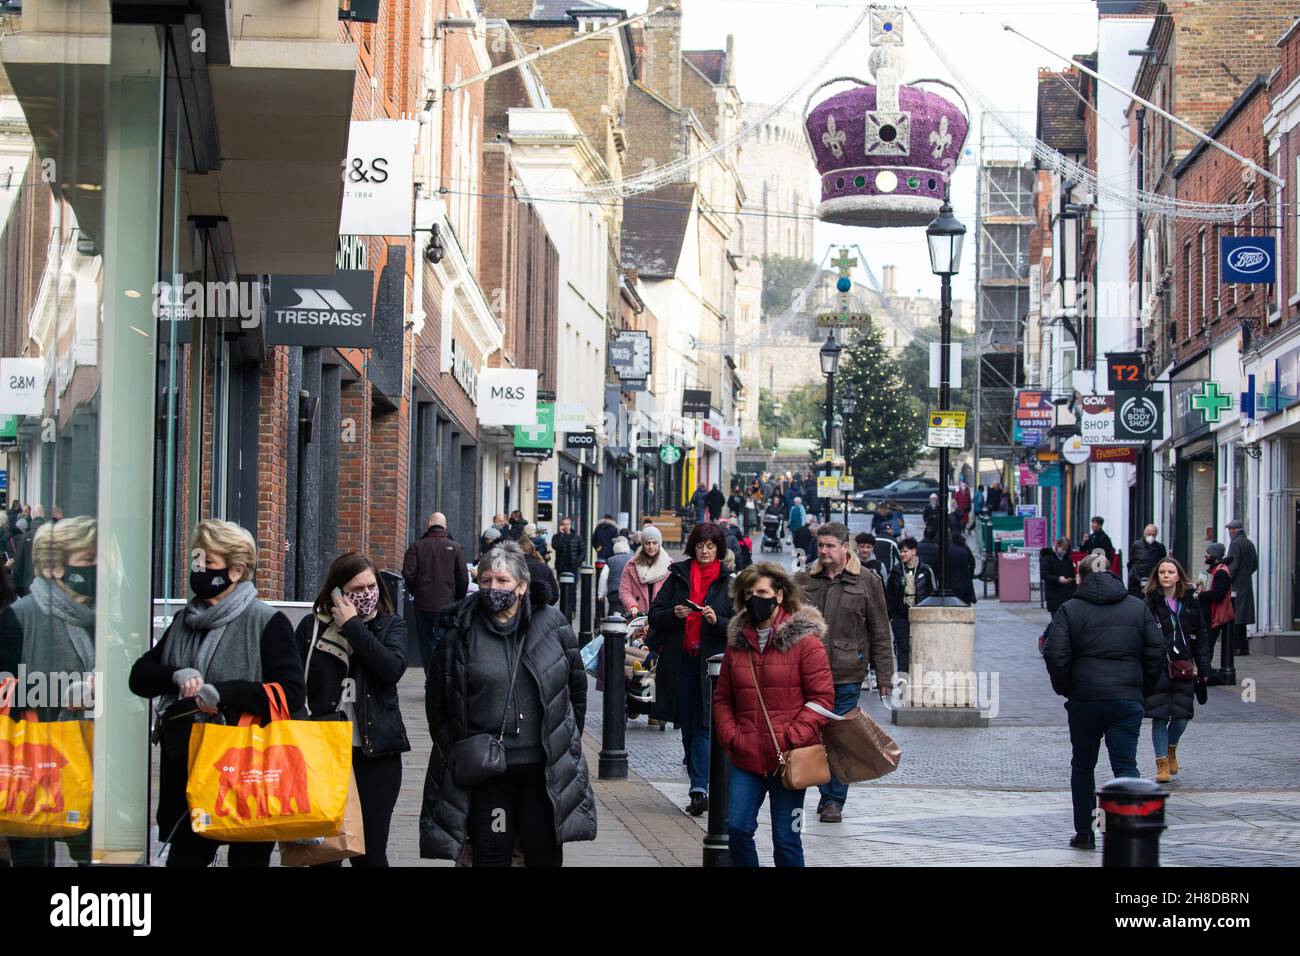 Windsor, UK. 29th November, 2021. Shoppers pass through the town centre, many wearing face coverings. The Health Secretary Sajid Javid yesterday announced following the emergence in the UK of the Omicron coronavirus variant that the wearing of face masks would become mandatory in shops and on public transport with effect from 4am on 30th November, with fines ranging between £200-£6,400 to be issued to people in England who fail to wear them depending on the number of offences. Credit: Mark Kerrison/Alamy Live News Stock Photo